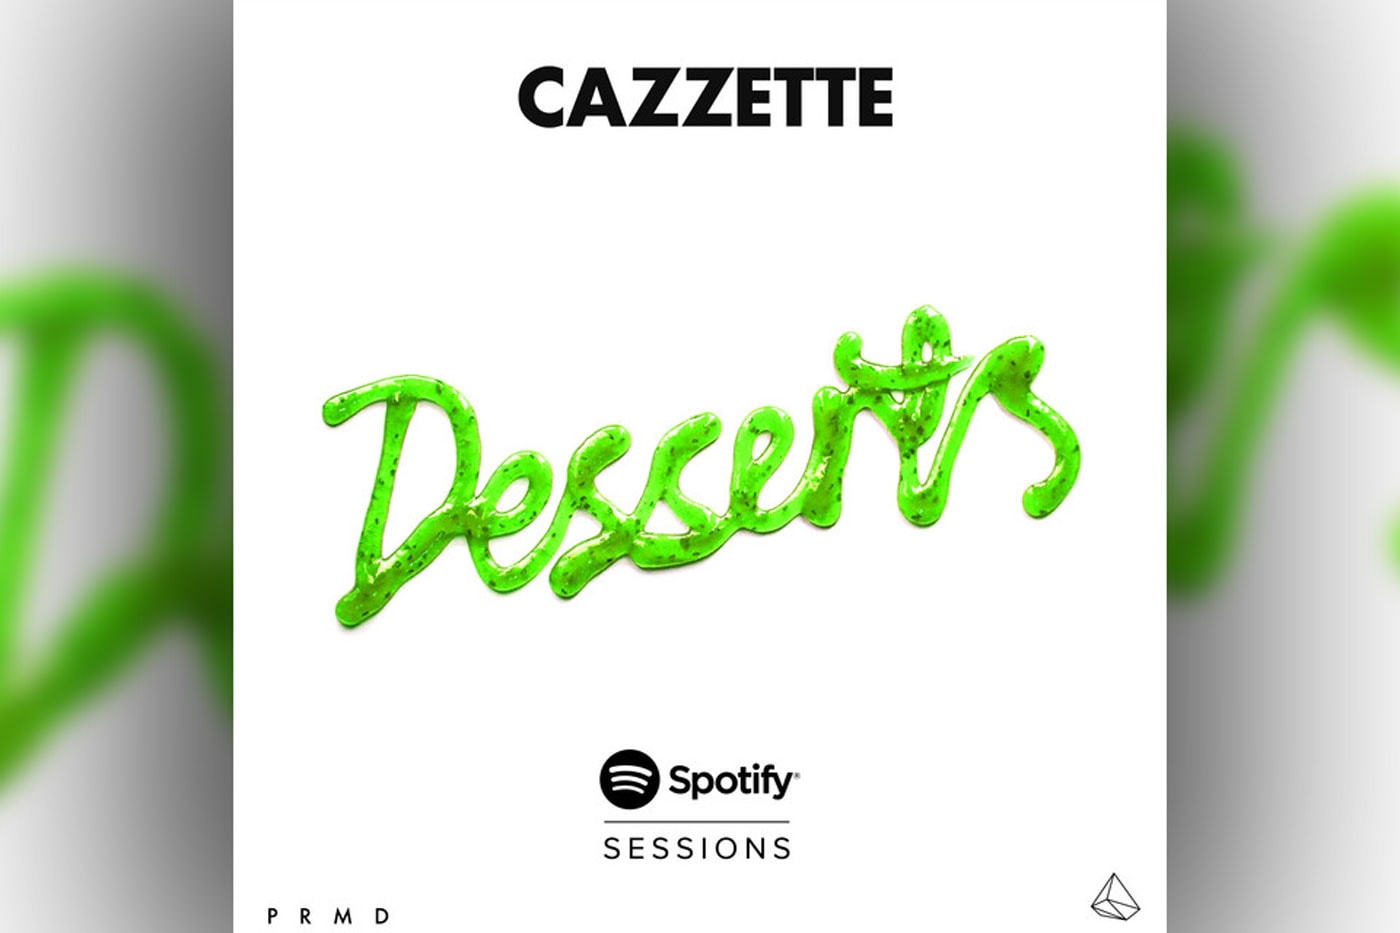 Listen to Cazzette's first Spotify Session, 'Desserts'